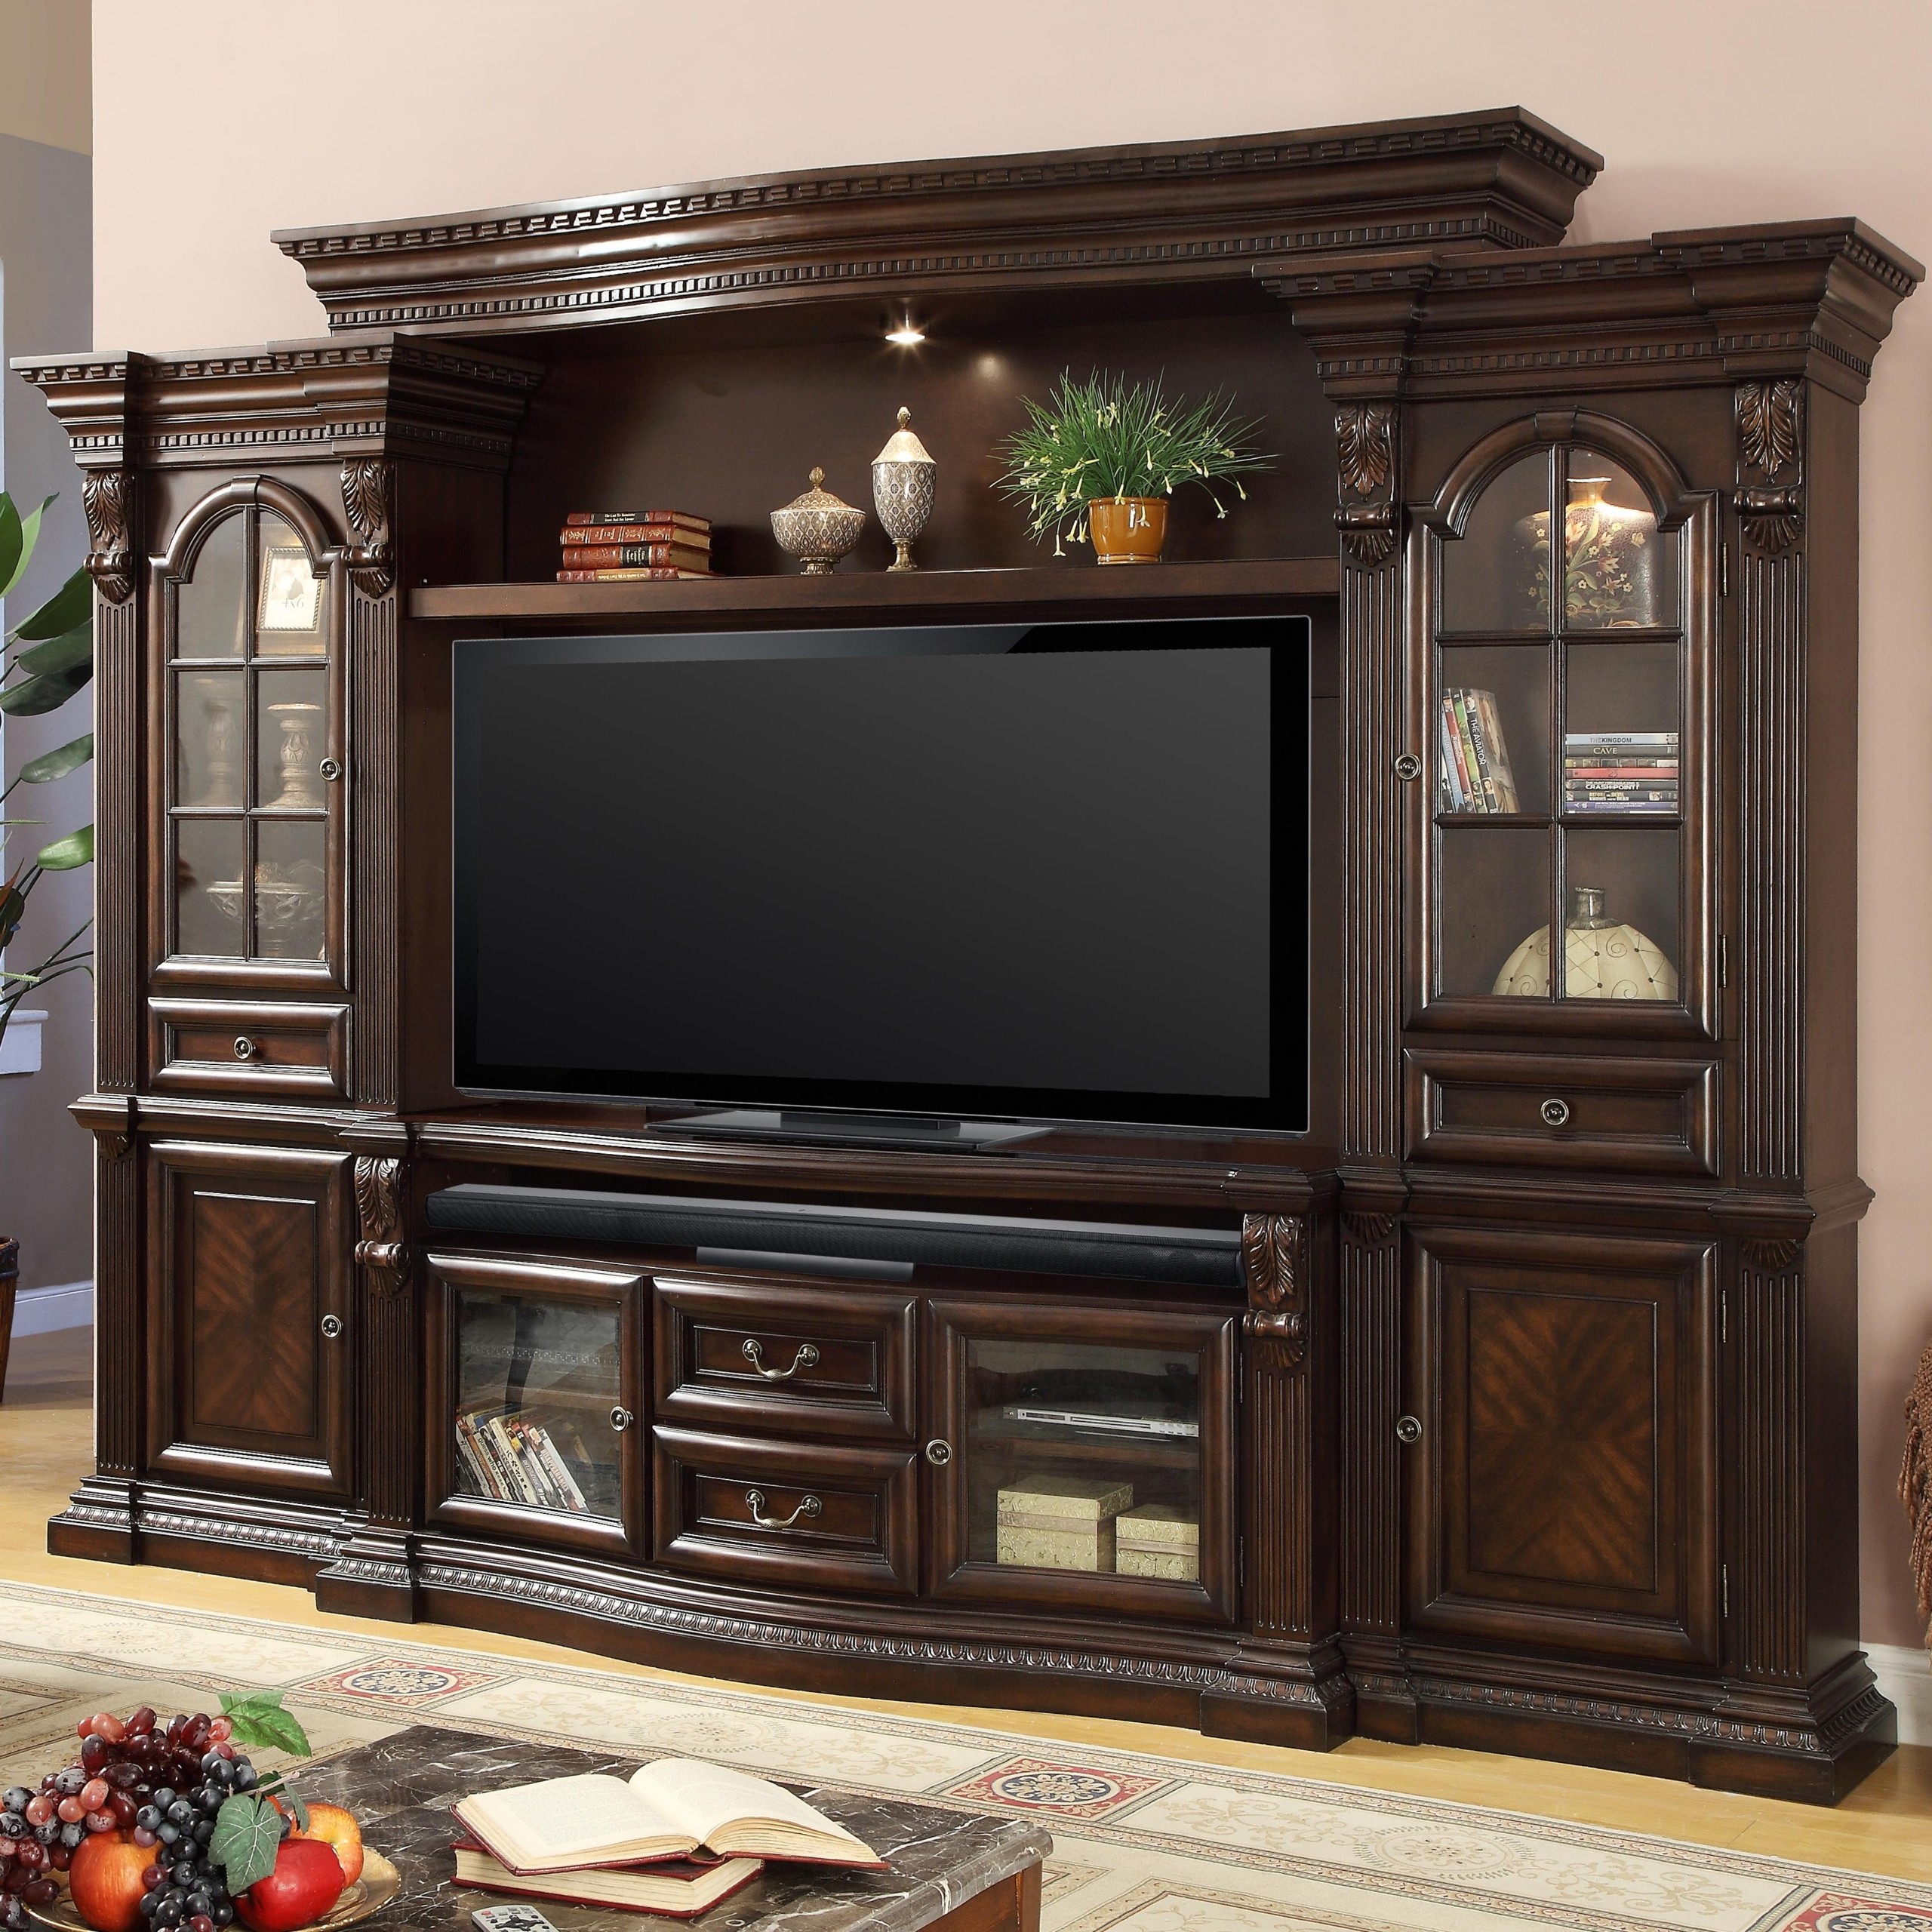 Friedlander Solid Wood Entertainment Center for TVs up to 70"